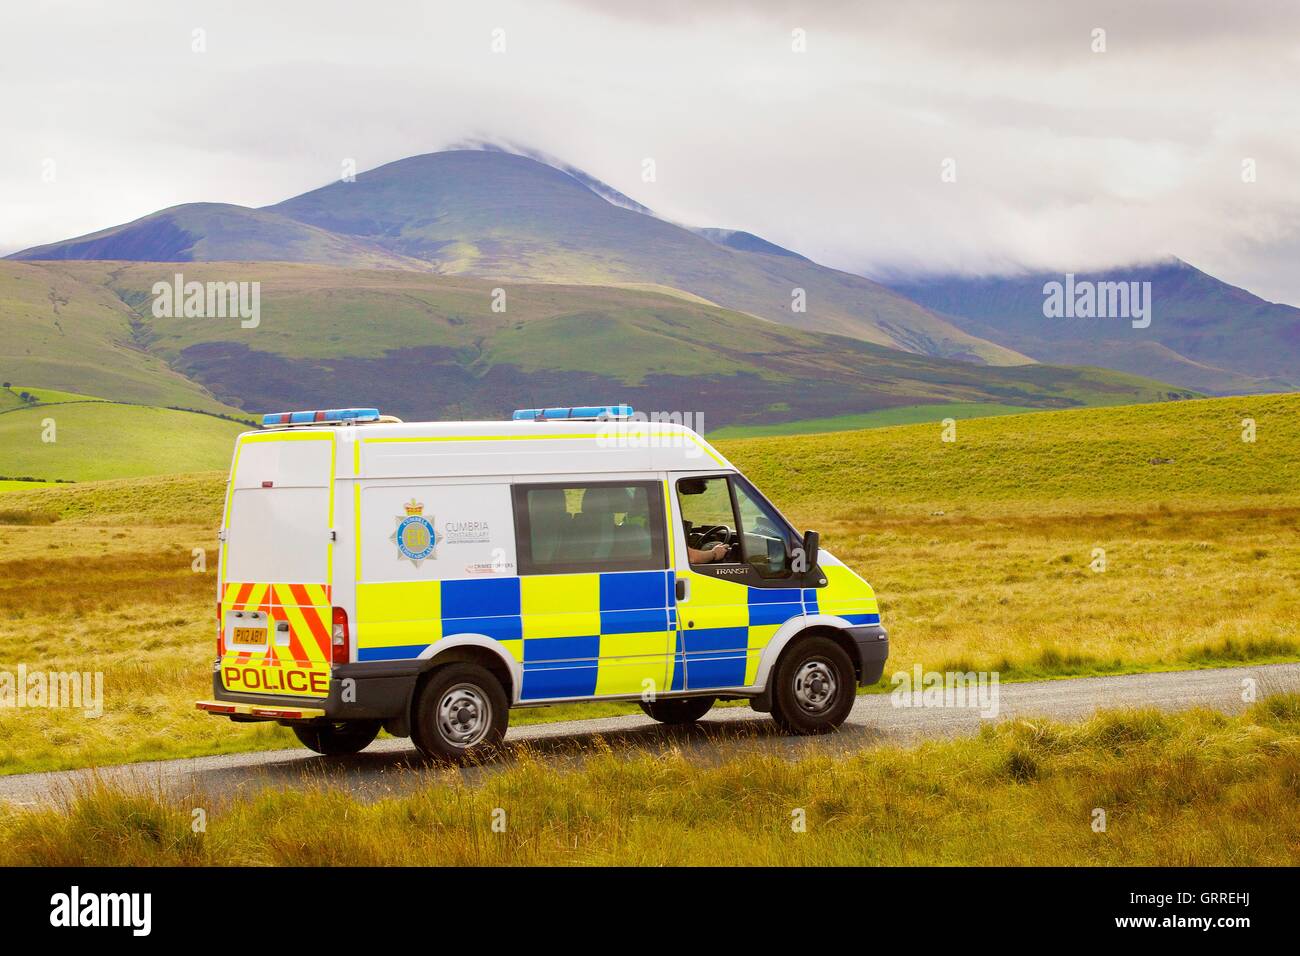 Police van on rural road. Aughertree Fell, Uldale, The Lake District National Park, Cumbria, England, United Kingdom, Europe. Stock Photo